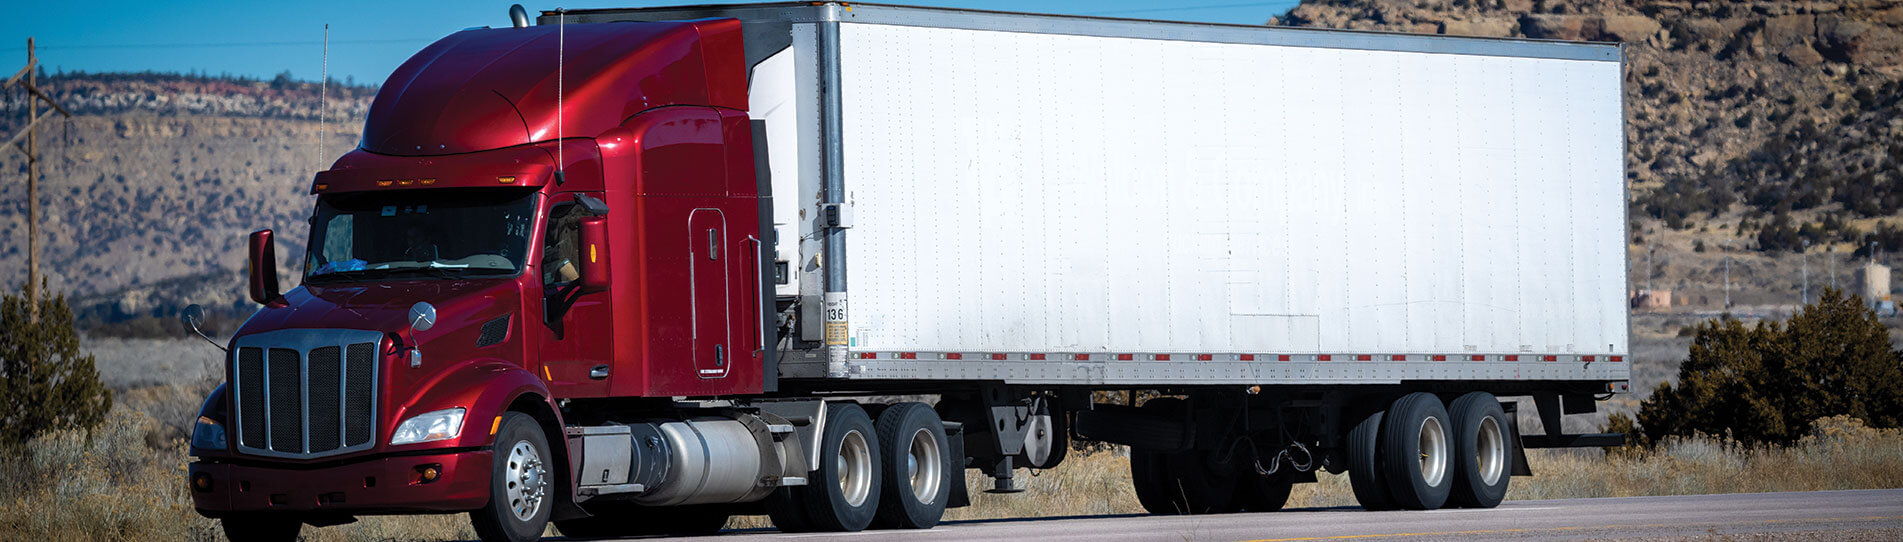 Orlando Trucking Services, Trucking Company and Freight Forwarding Services